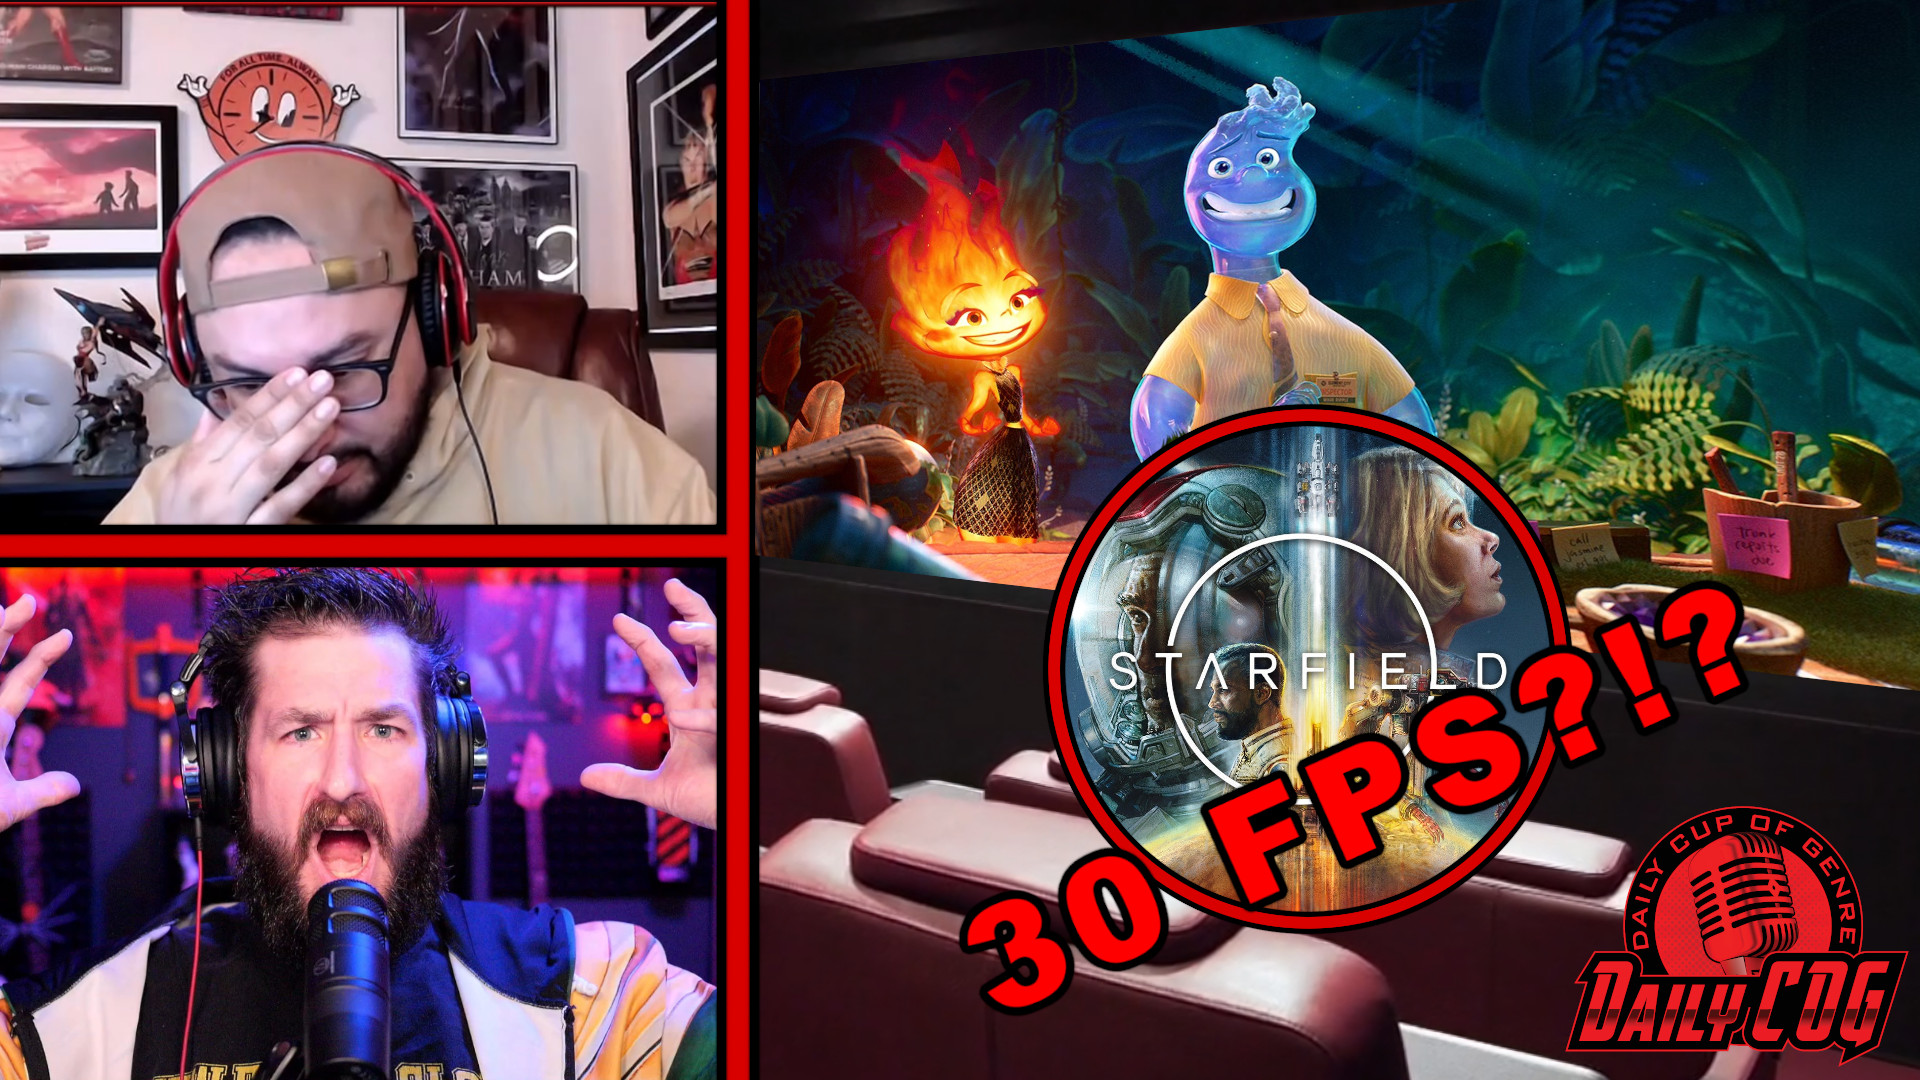 A thumbnail for the Daily cup of genre podcast. It features images from the Pixar movie Elemental and the video game Starfield. The hosts are seen making distressed faces. the words "30 fps" are seen followed by question marks.